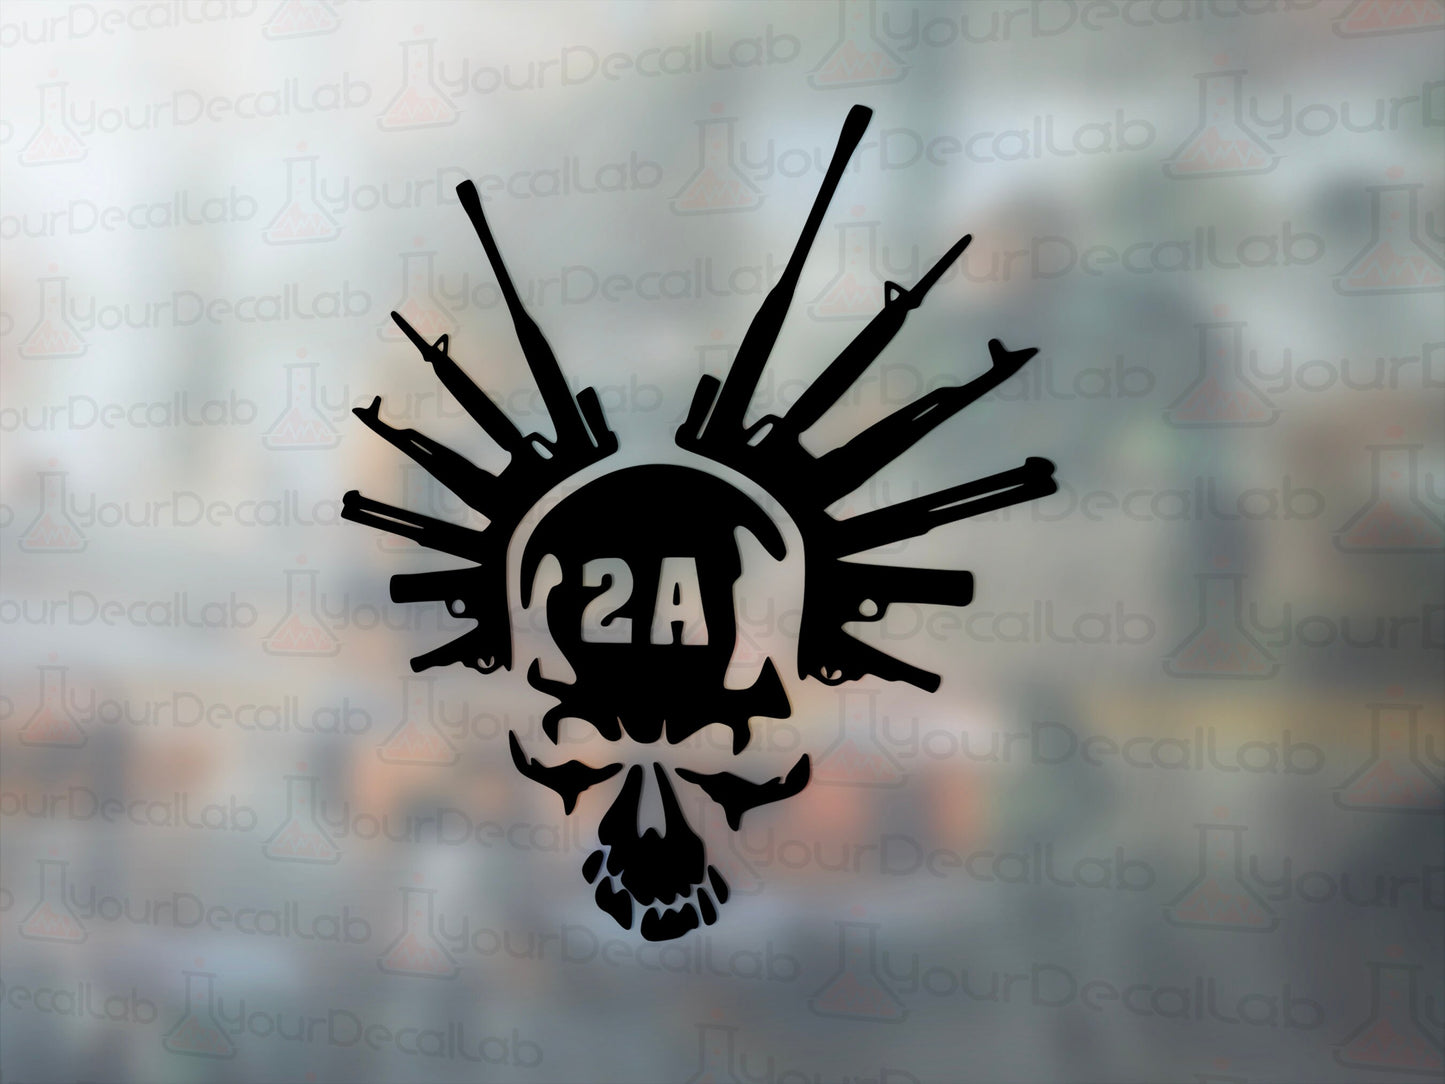 2A Skull Guns Decal - Many Colors & Sizes